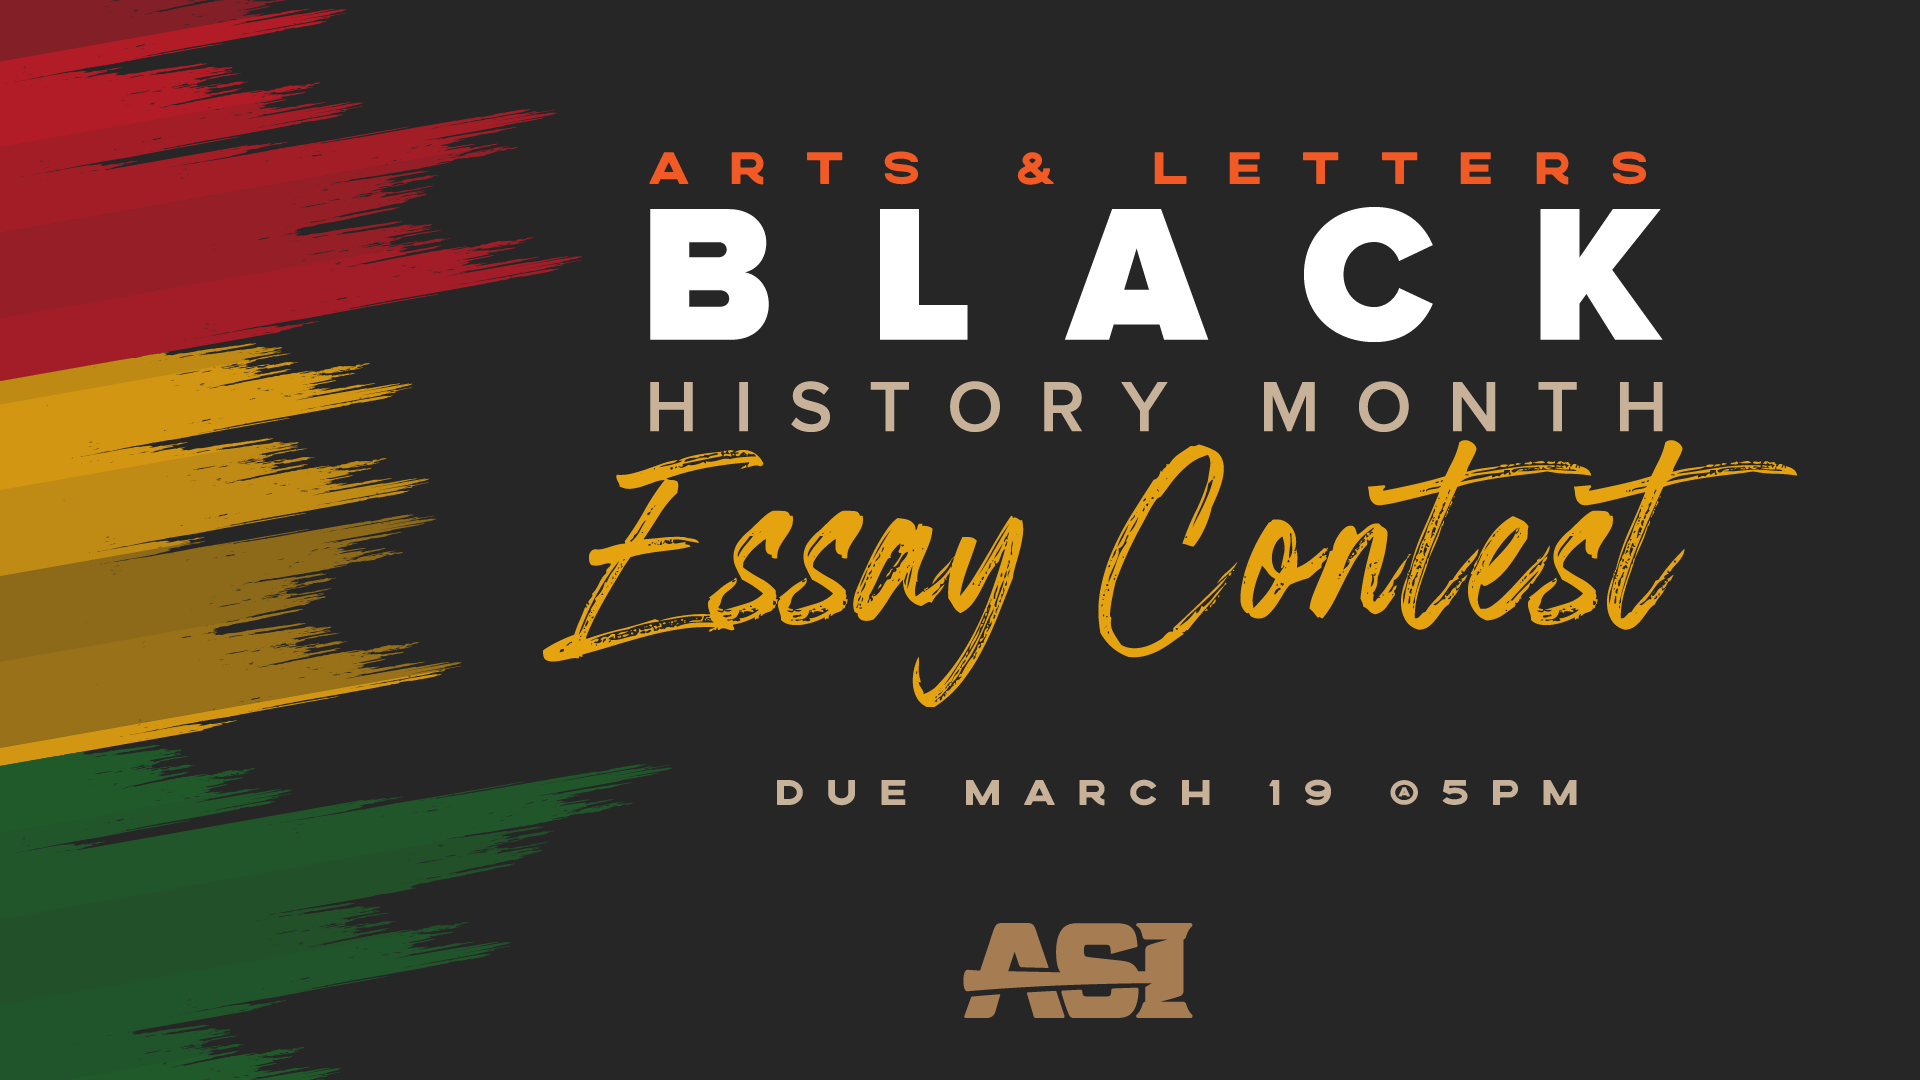 Black History Month Essay Contest Associated Students Inc. Cal State LA